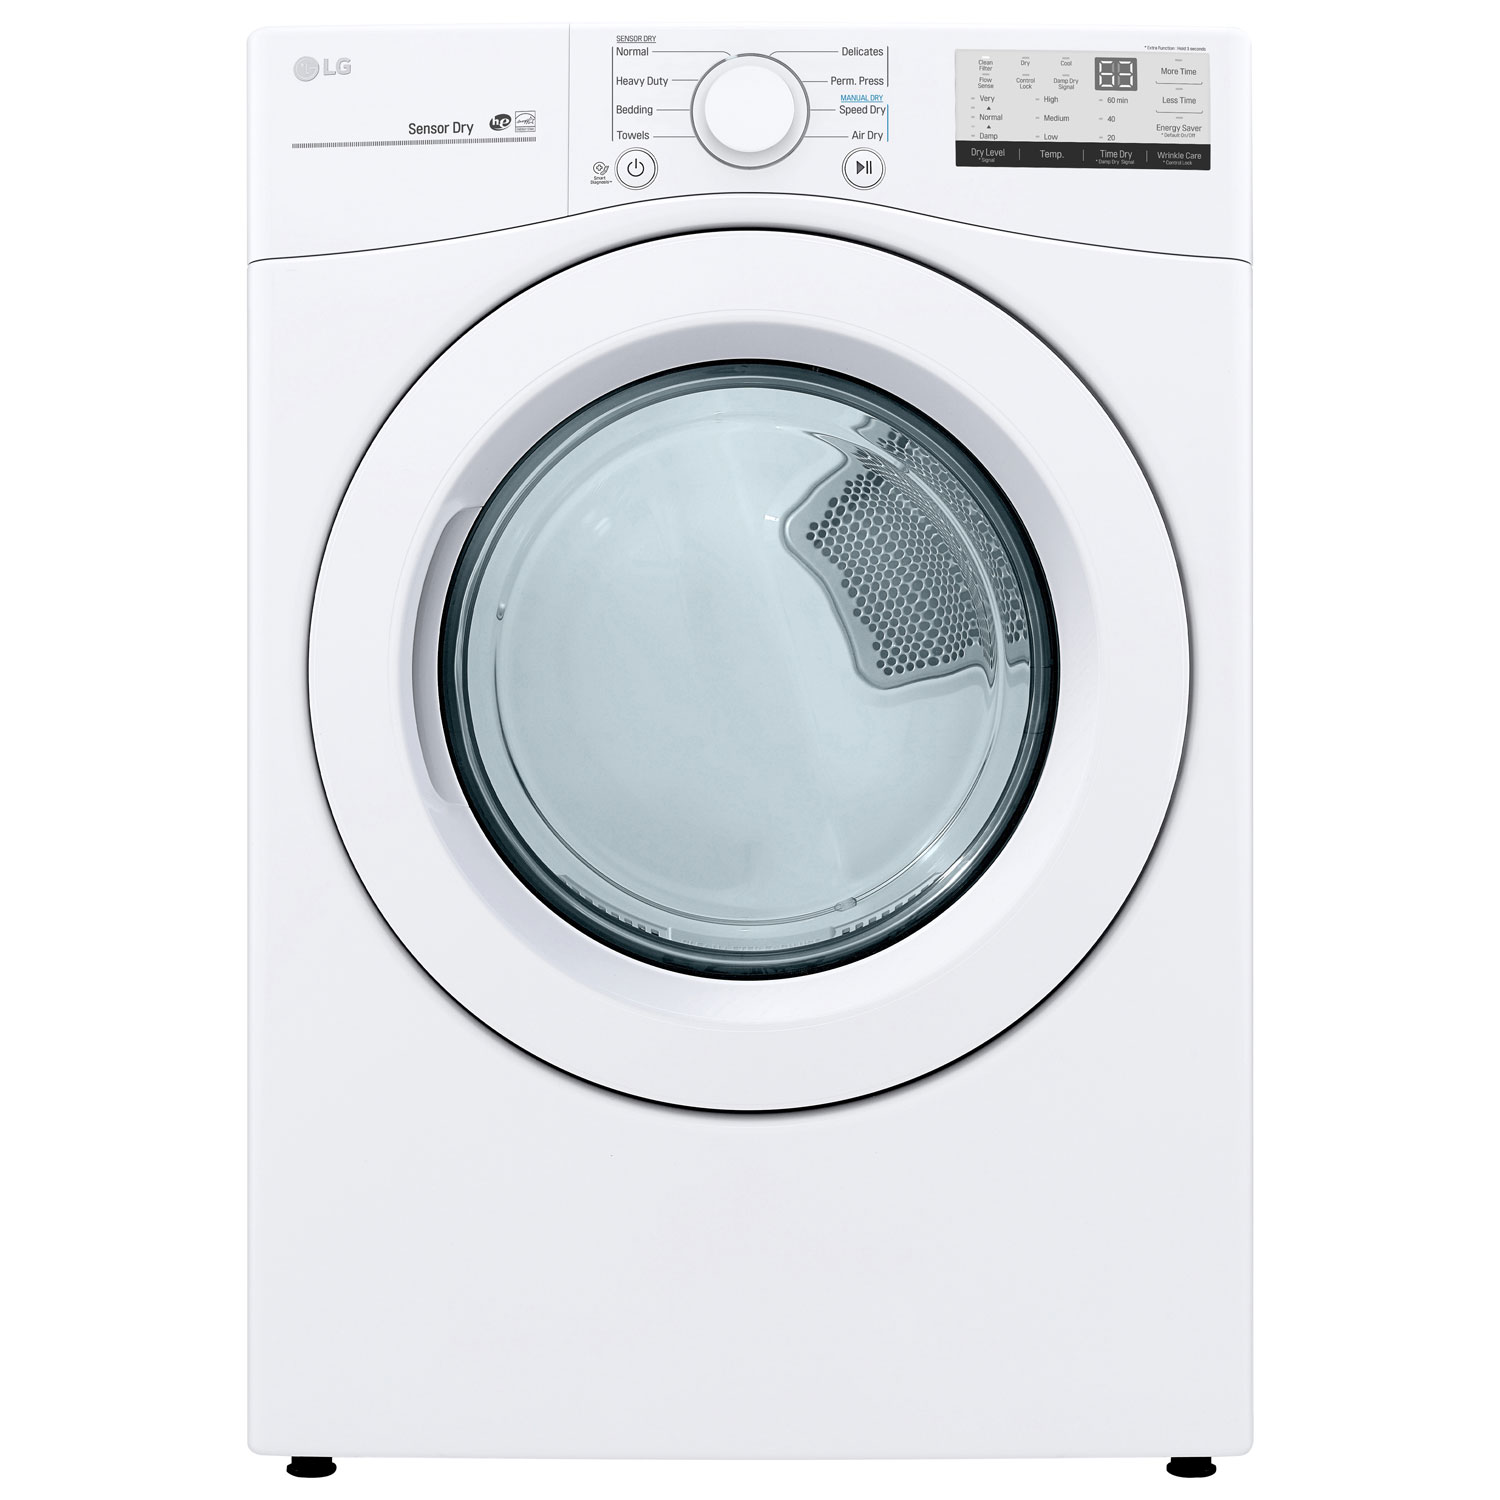 LG 7.4 Cu. Ft. Electric Dryer (DLE3400W) - White